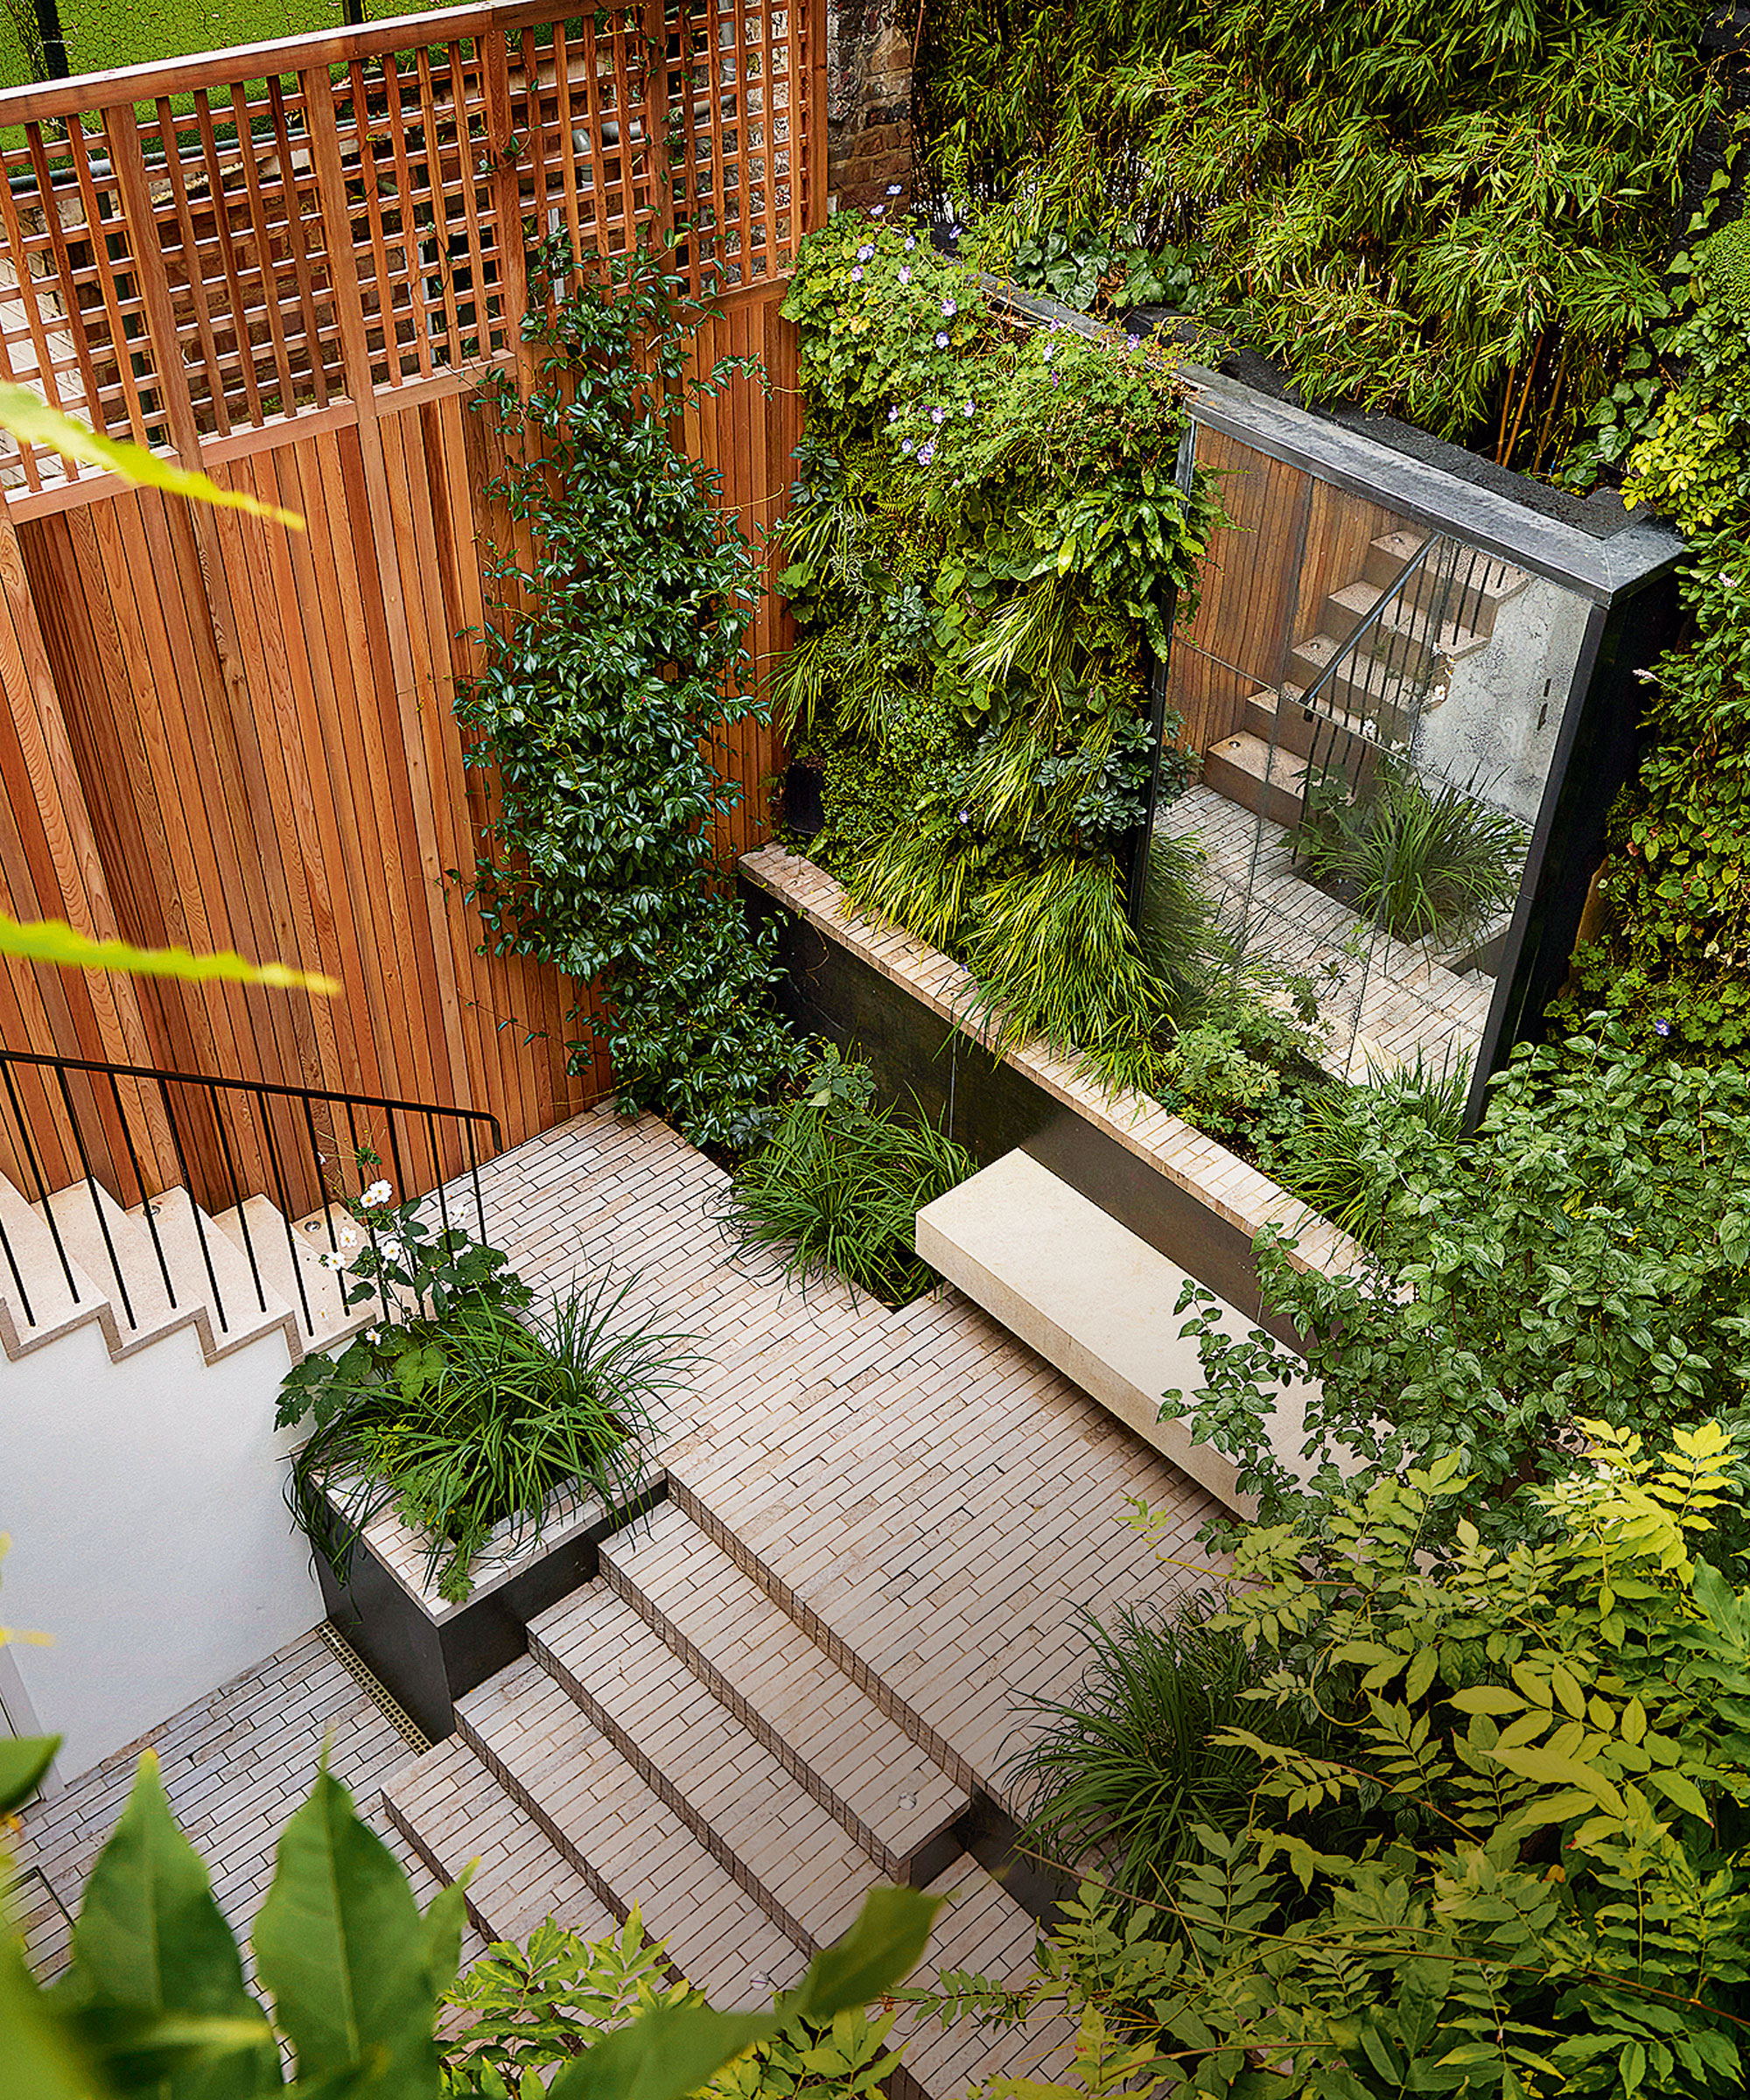 Small garden with striking vertical design, mirrored doors, plant wall, wooden paneling, brick steps, planters